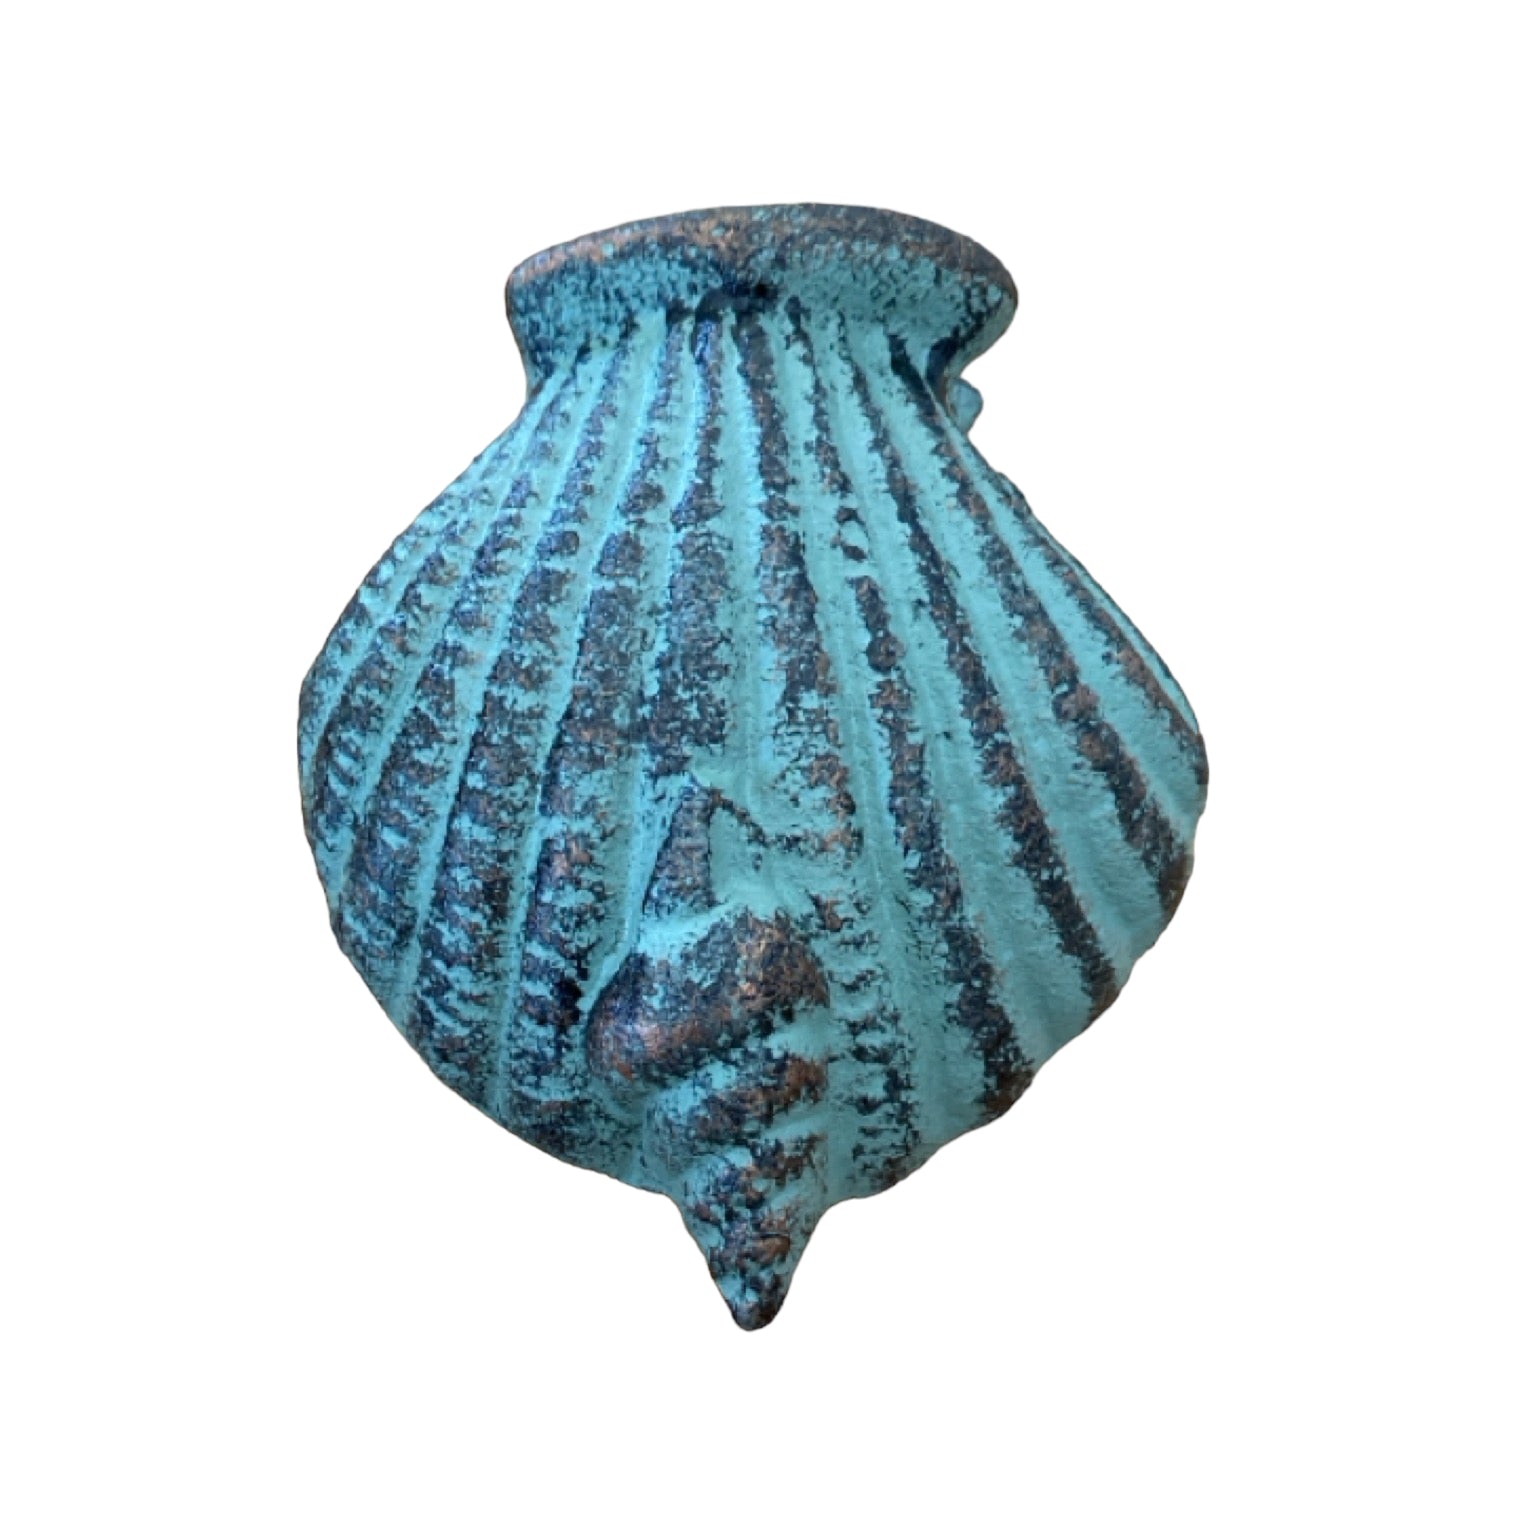 Door Knocker Shell Beach House - The Renmy Store Homewares & Gifts 